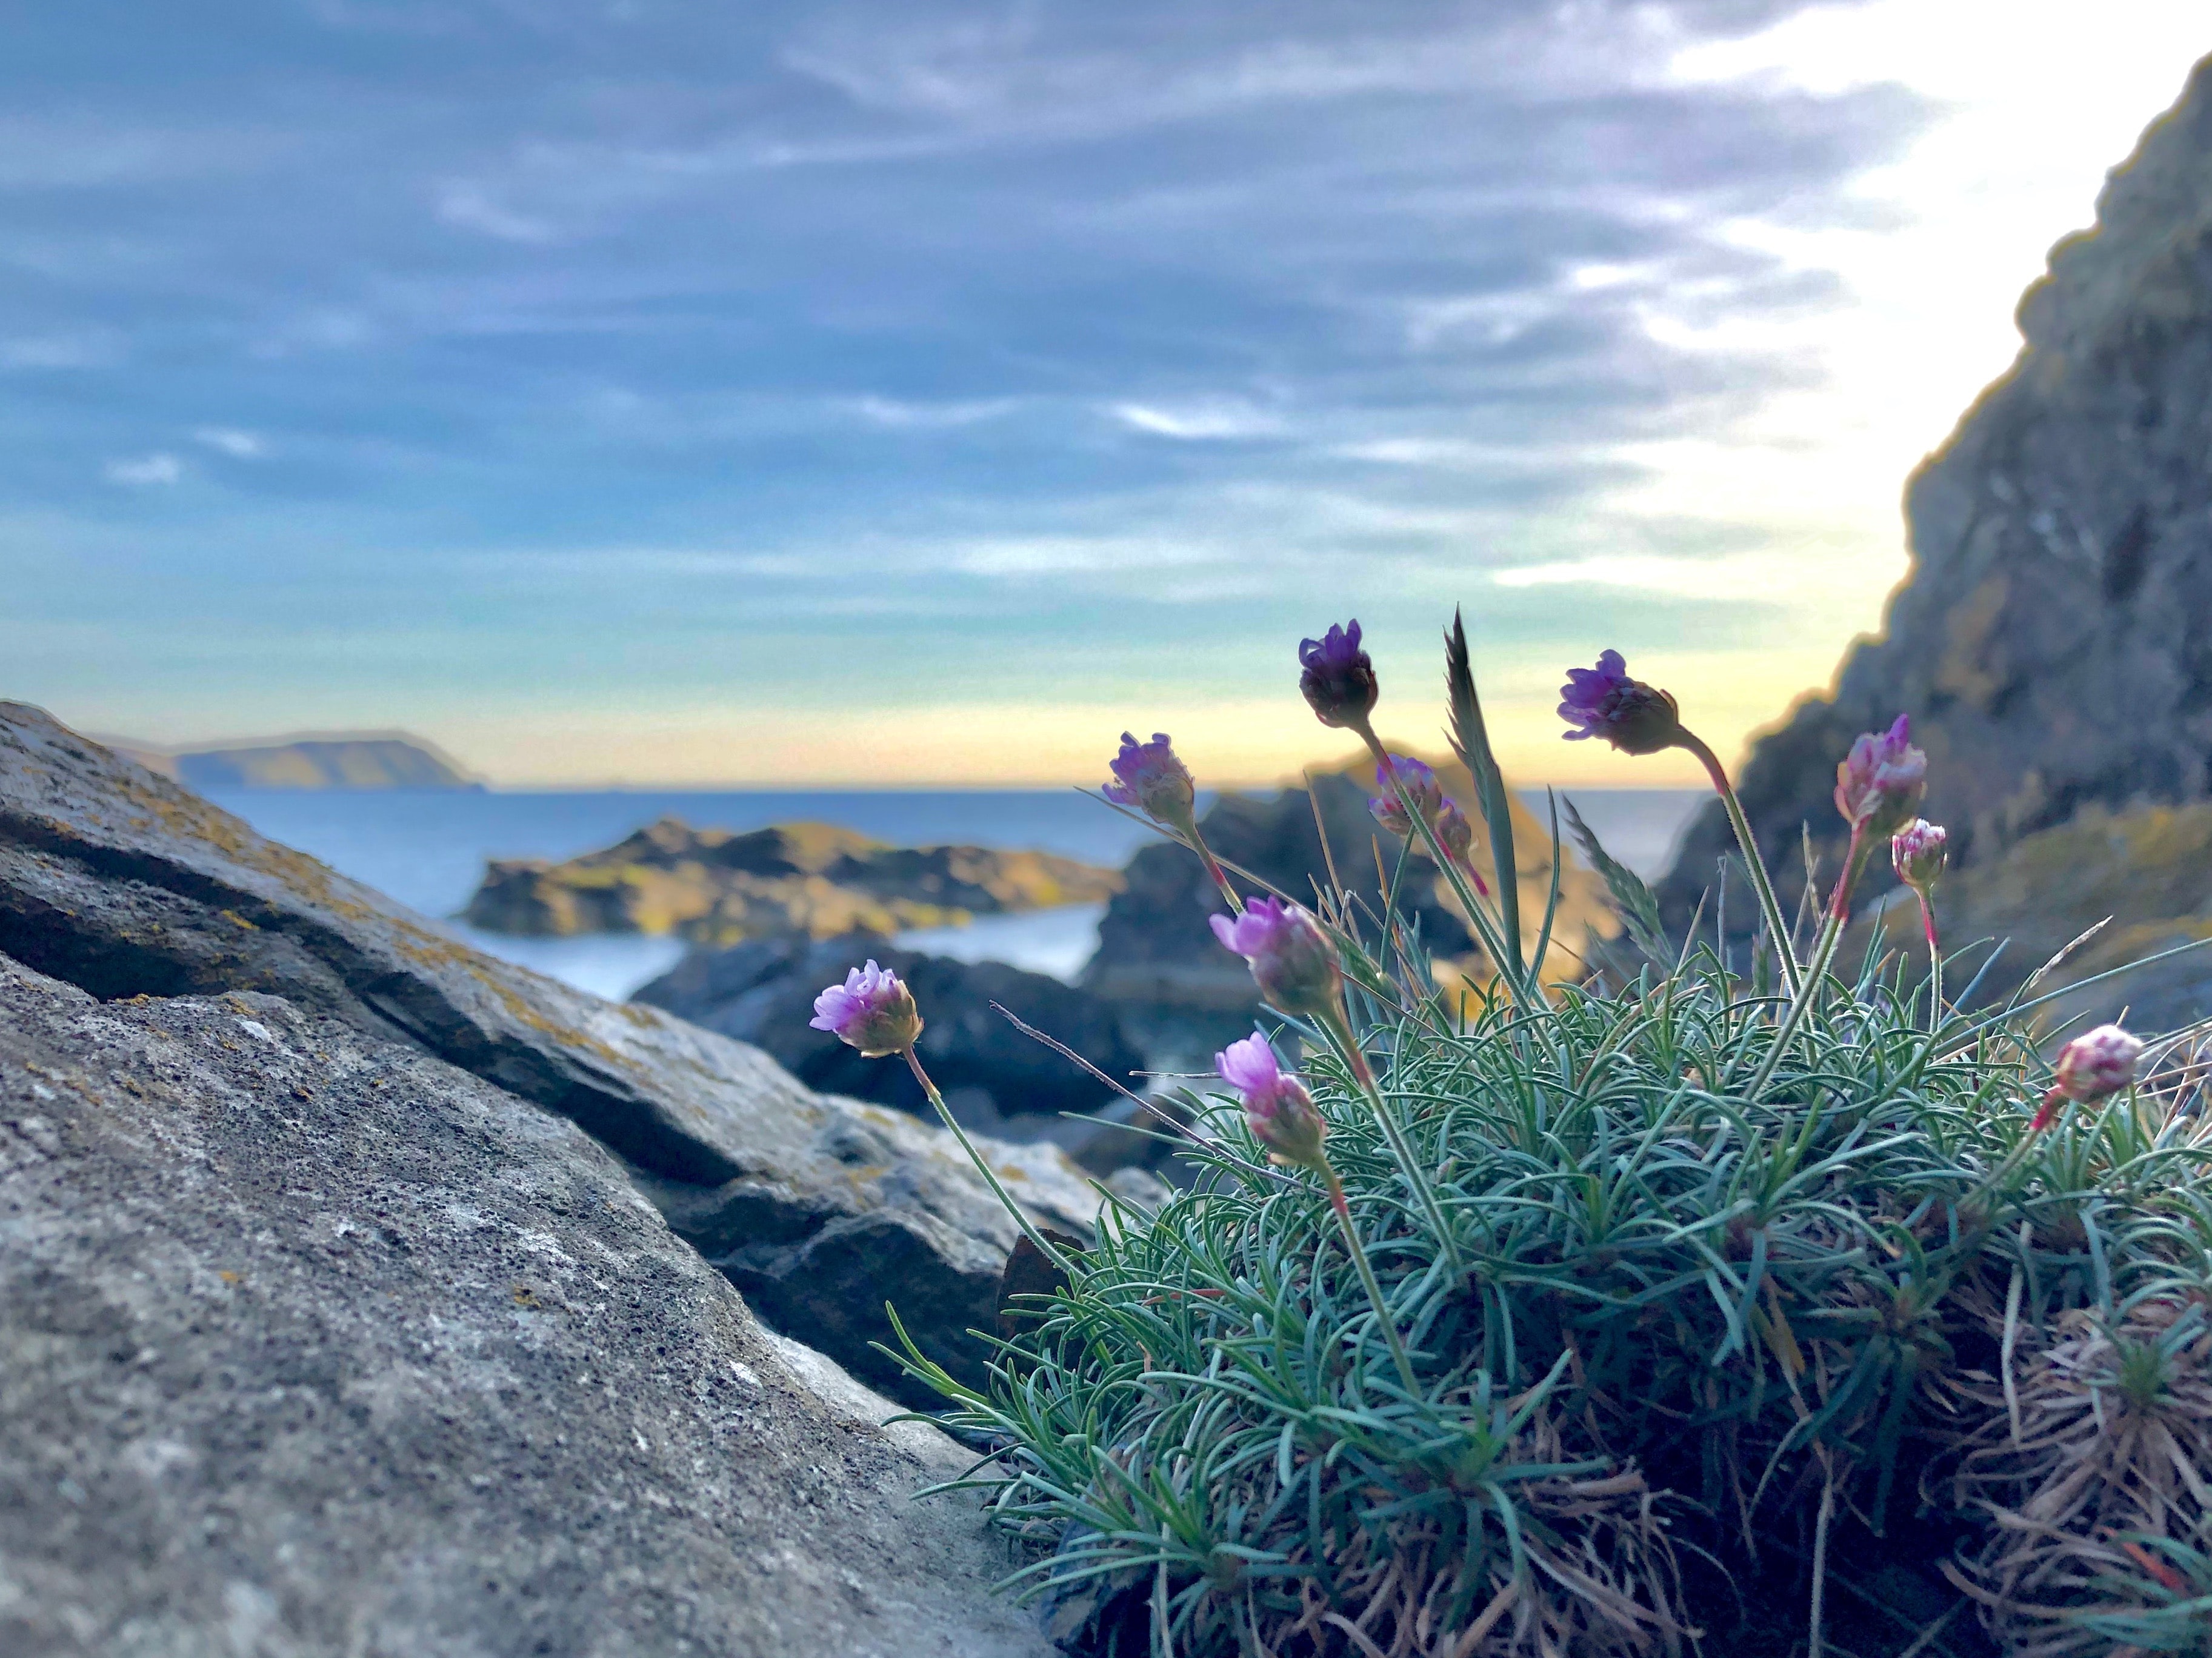 On a mountain, overlooking a beautiful vista, a cluster of pink flowers grows in the crack of a boulder